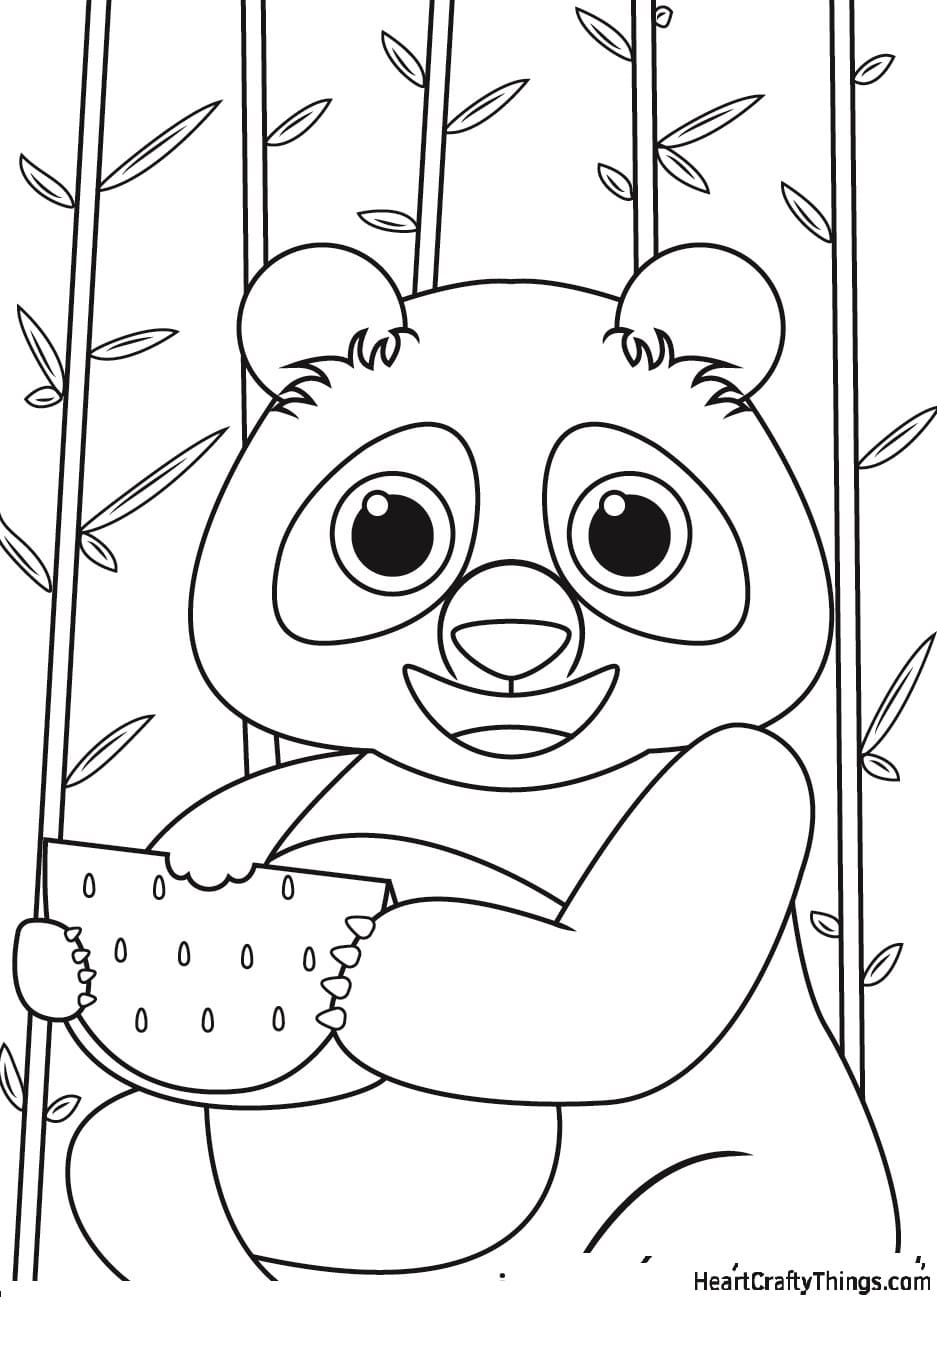 Giant Panda Cute Coloring Page